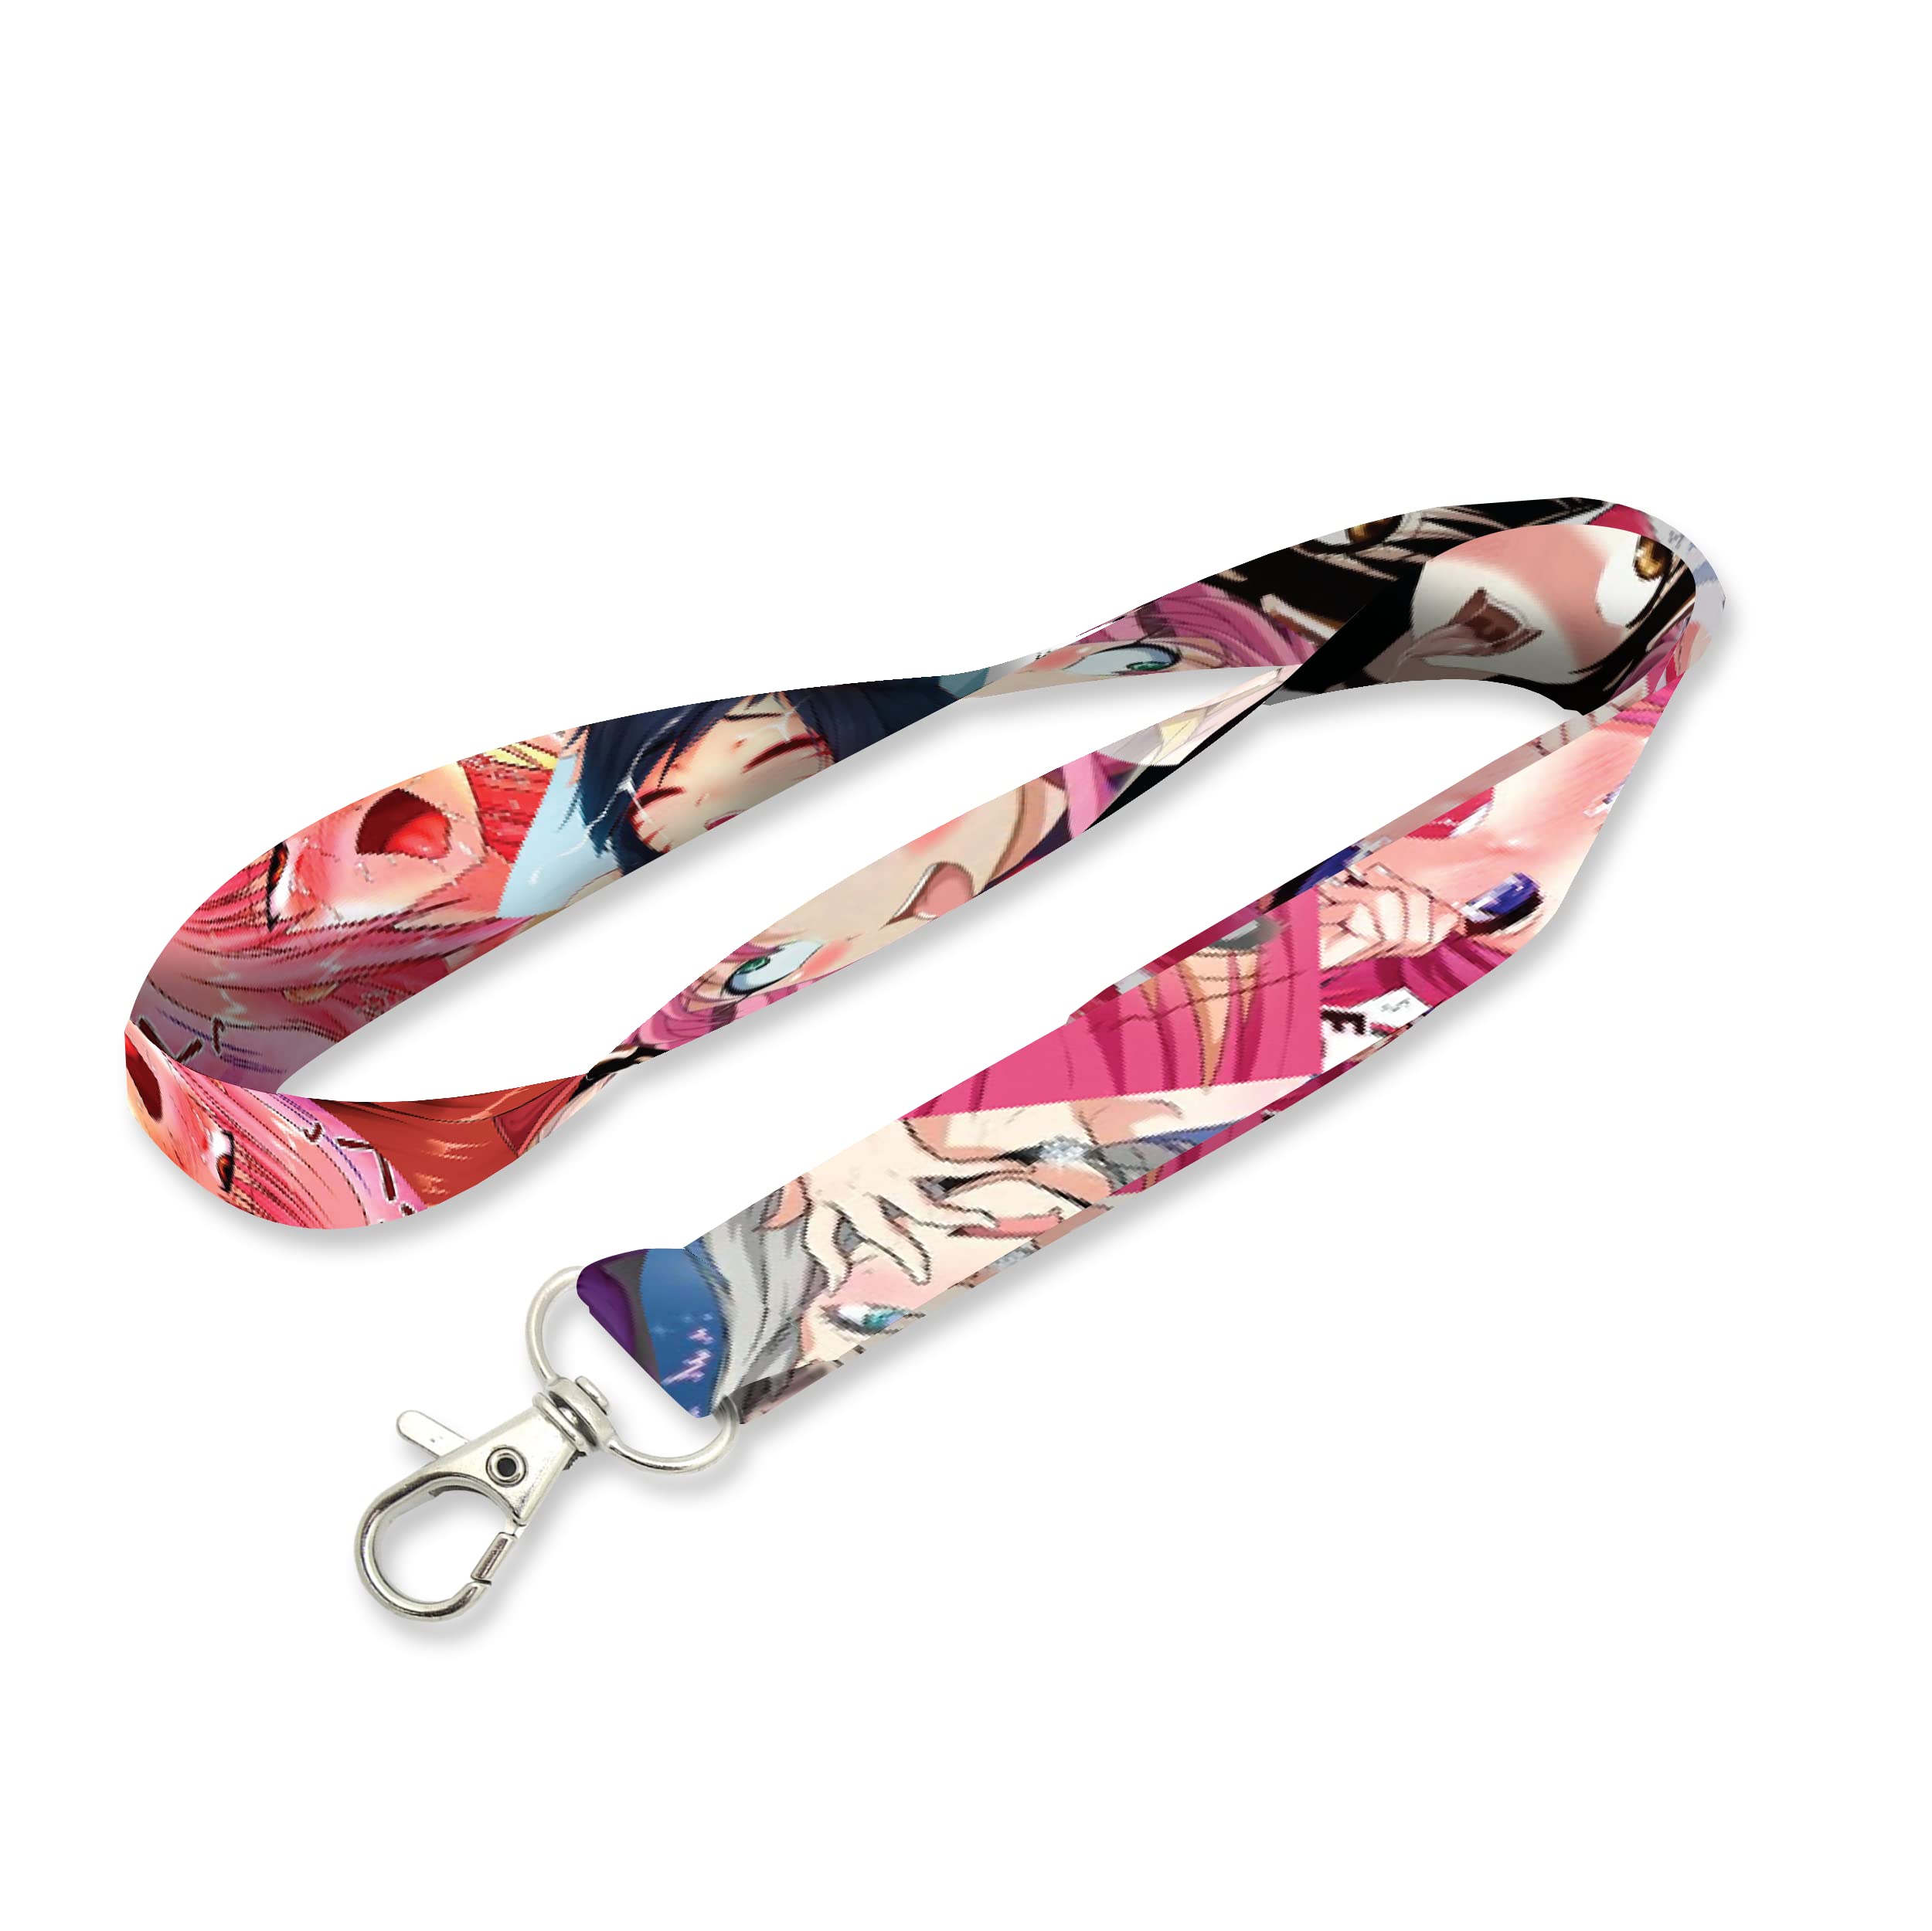 Stylish anime lanyard In Varied Lengths And Prints - Alibaba.com